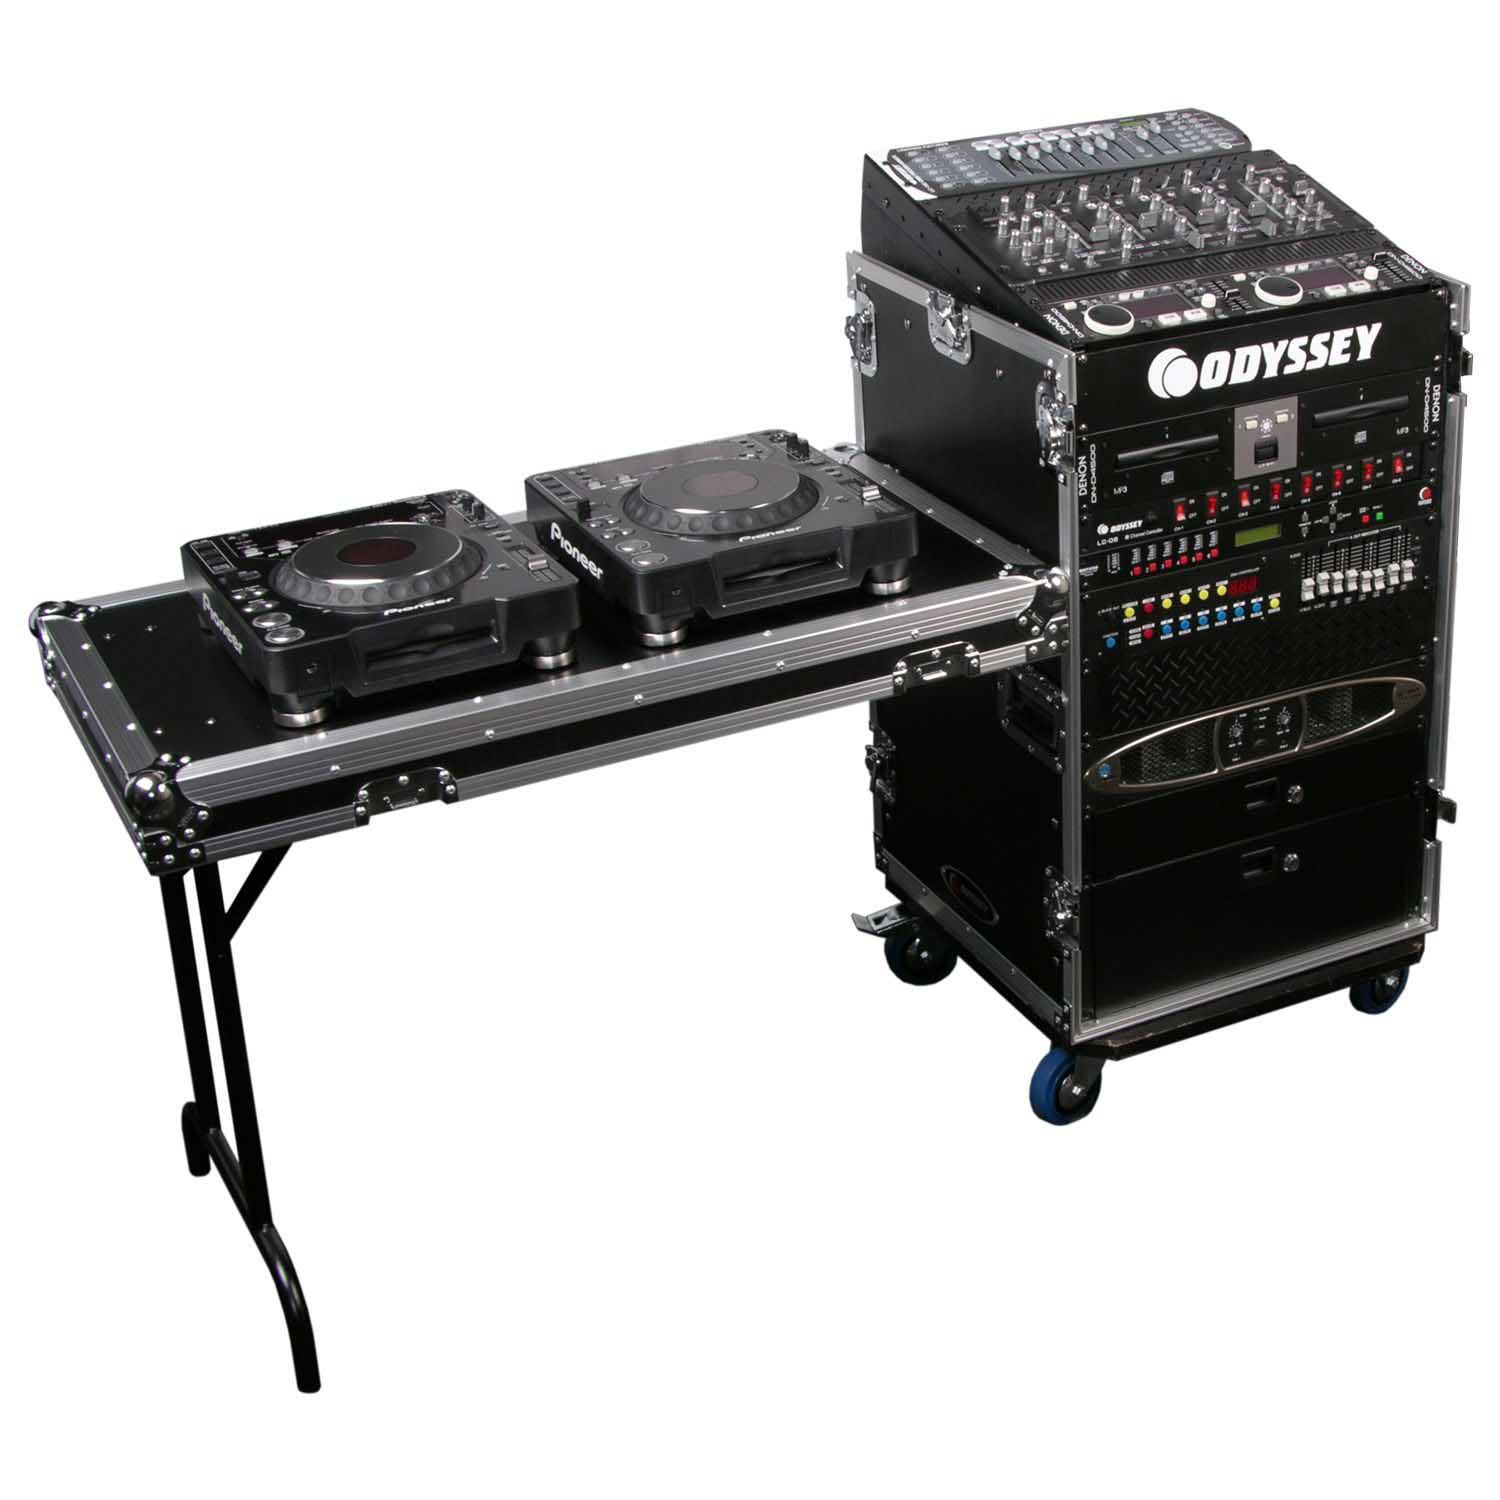 Odyssey FZ1116WDLX 11U Top Slanted 16U Vertical Pro Combo Rack with Side Table and Casters - Hollywood DJ